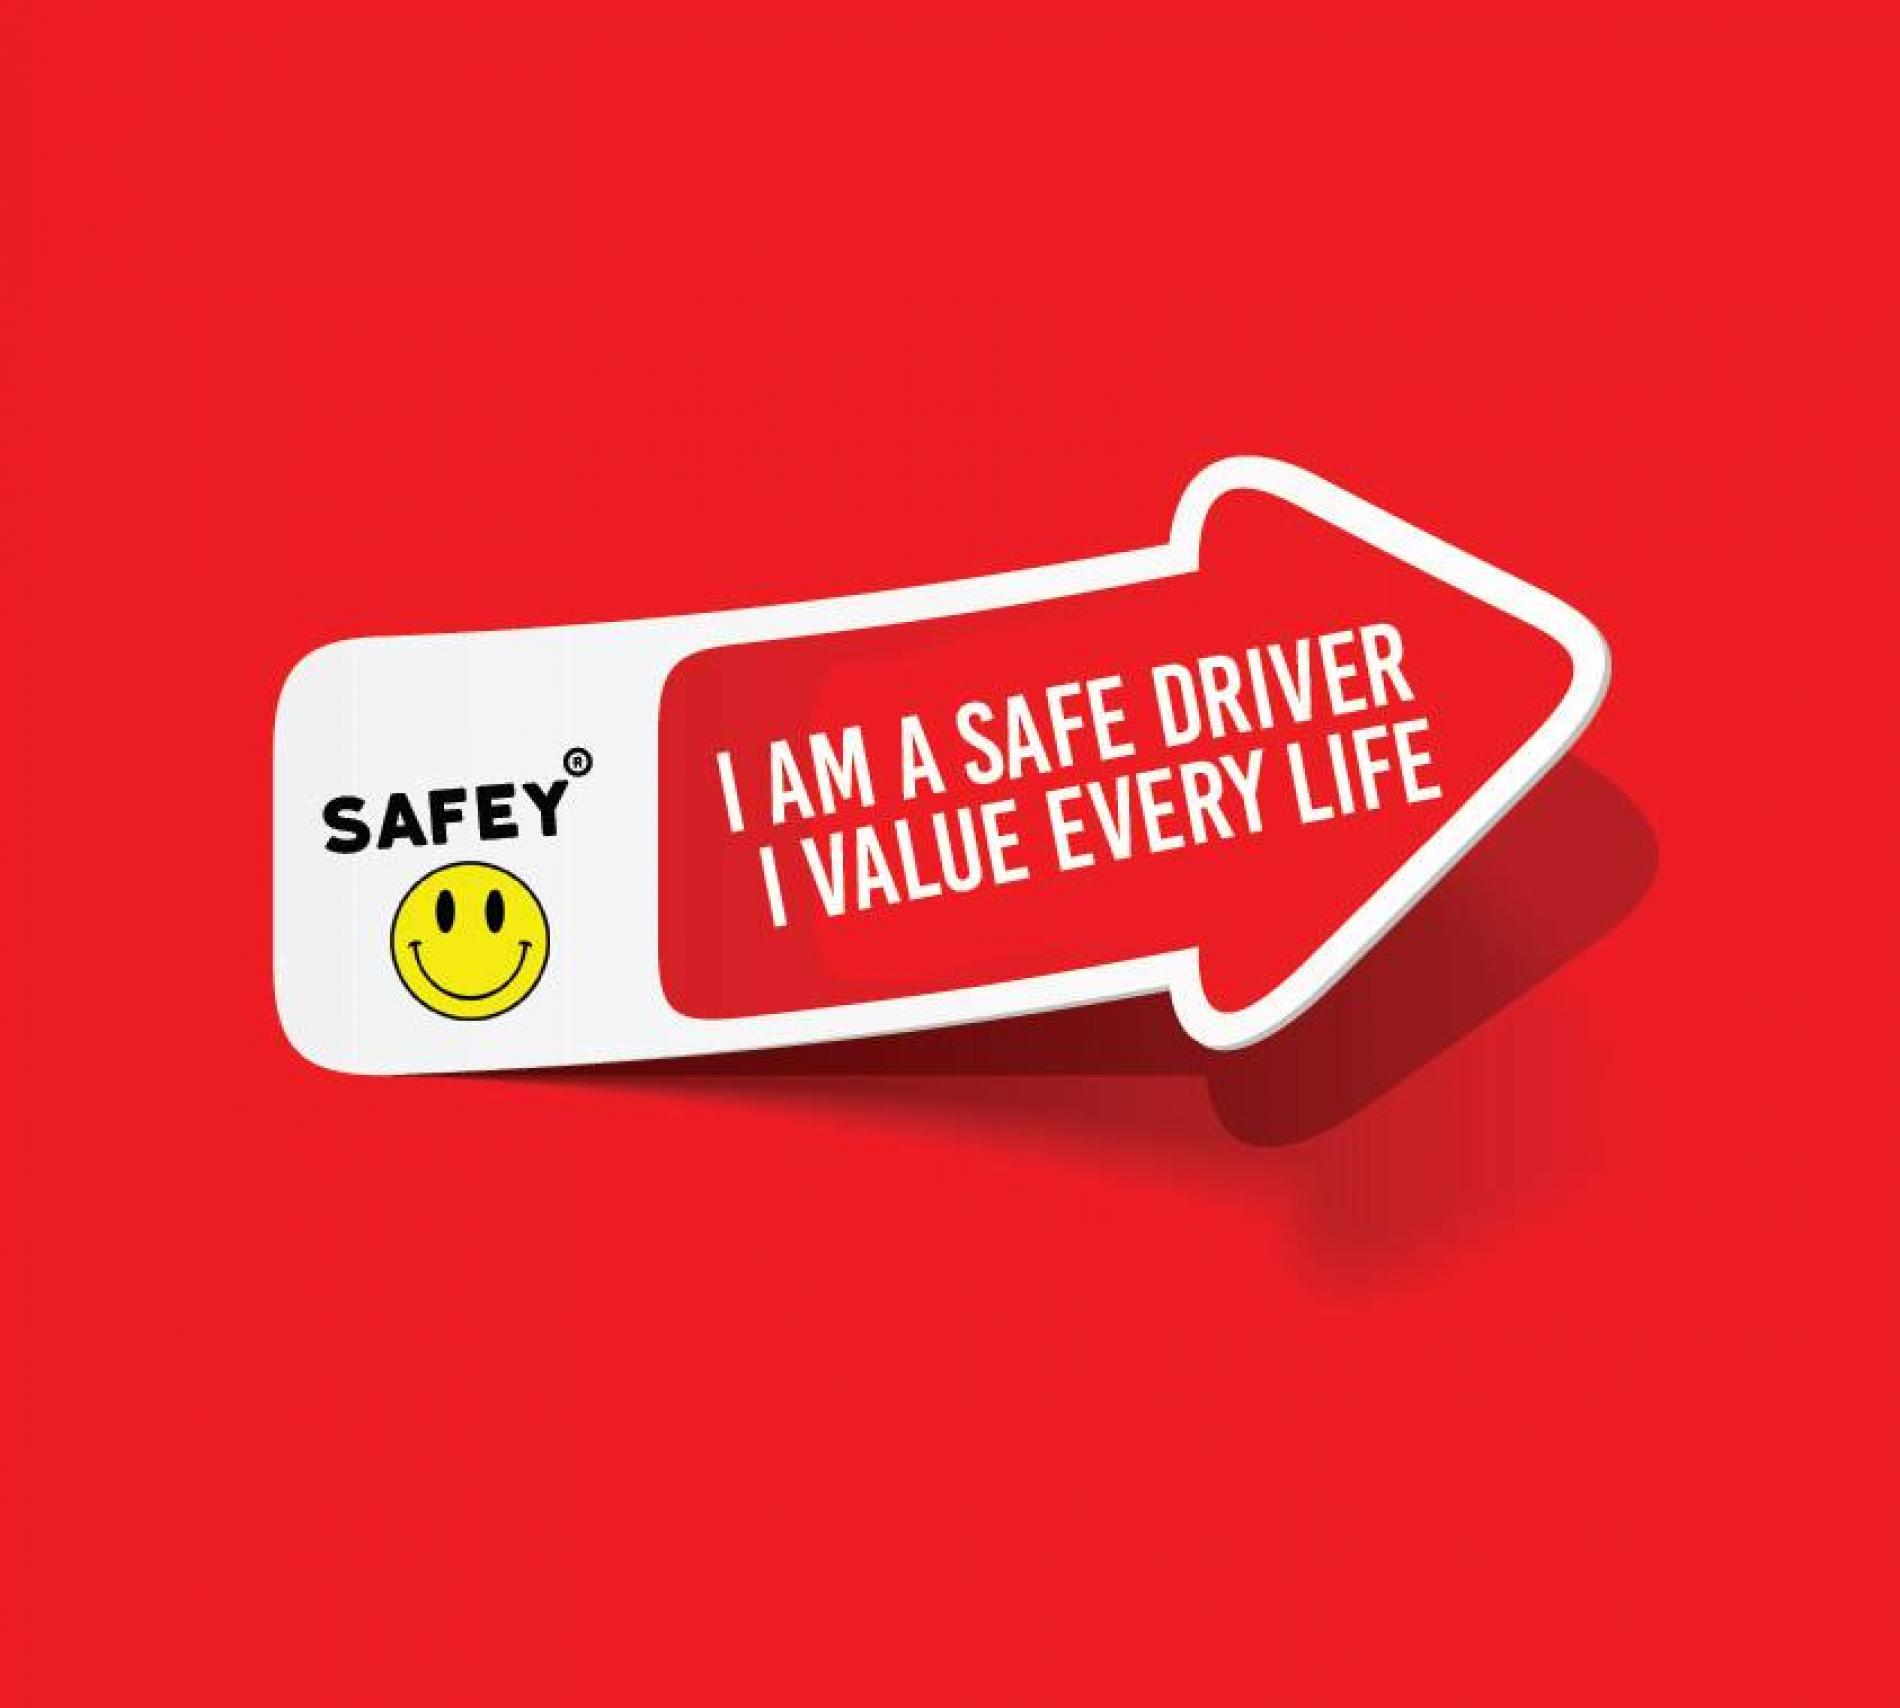 Infaas Is An Artist For The “I’m A Safe Driver” Campaign